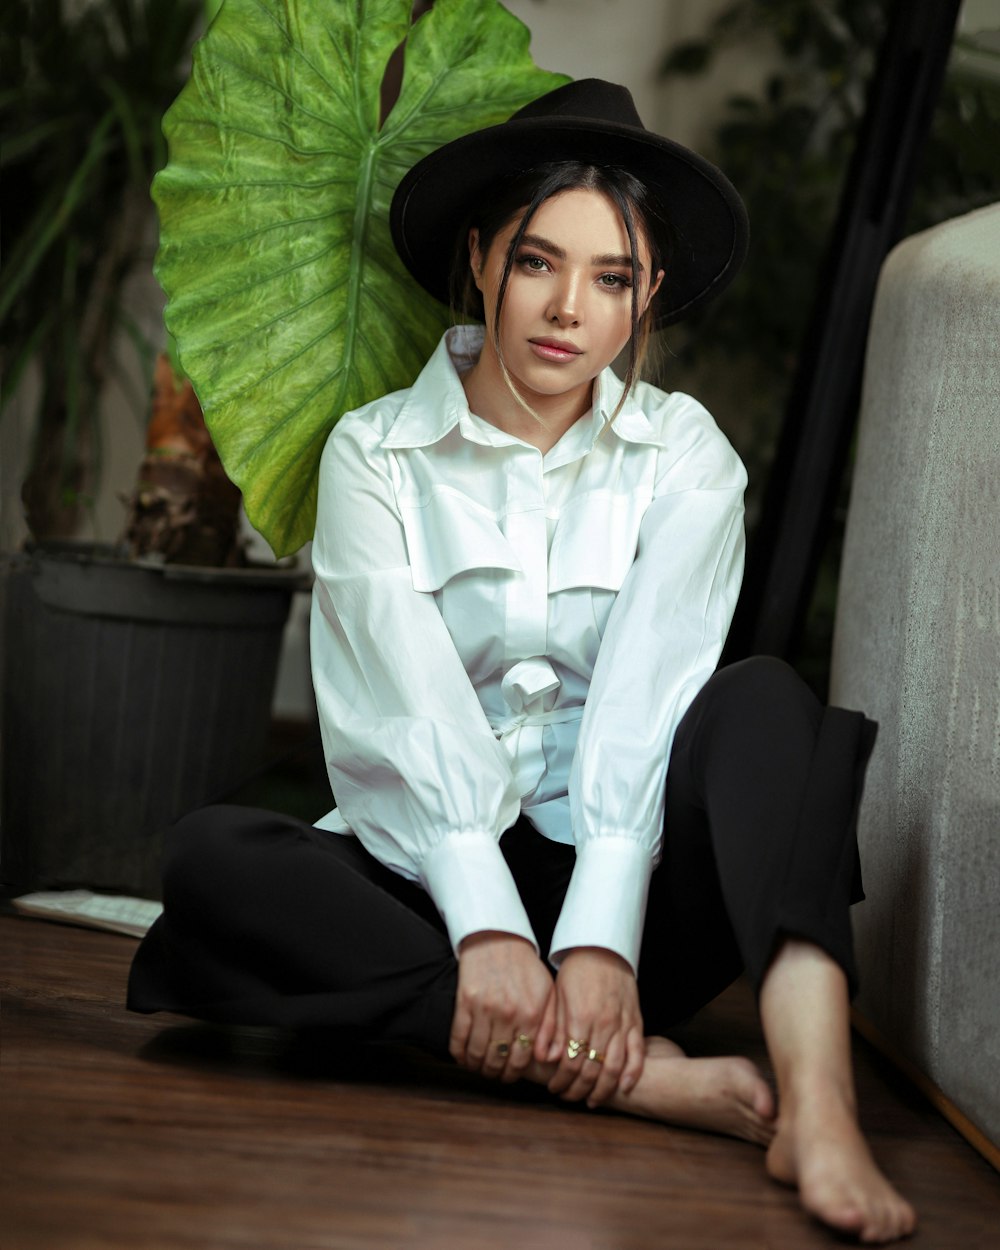 woman in white button up shirt and black pants sitting on gray sofa